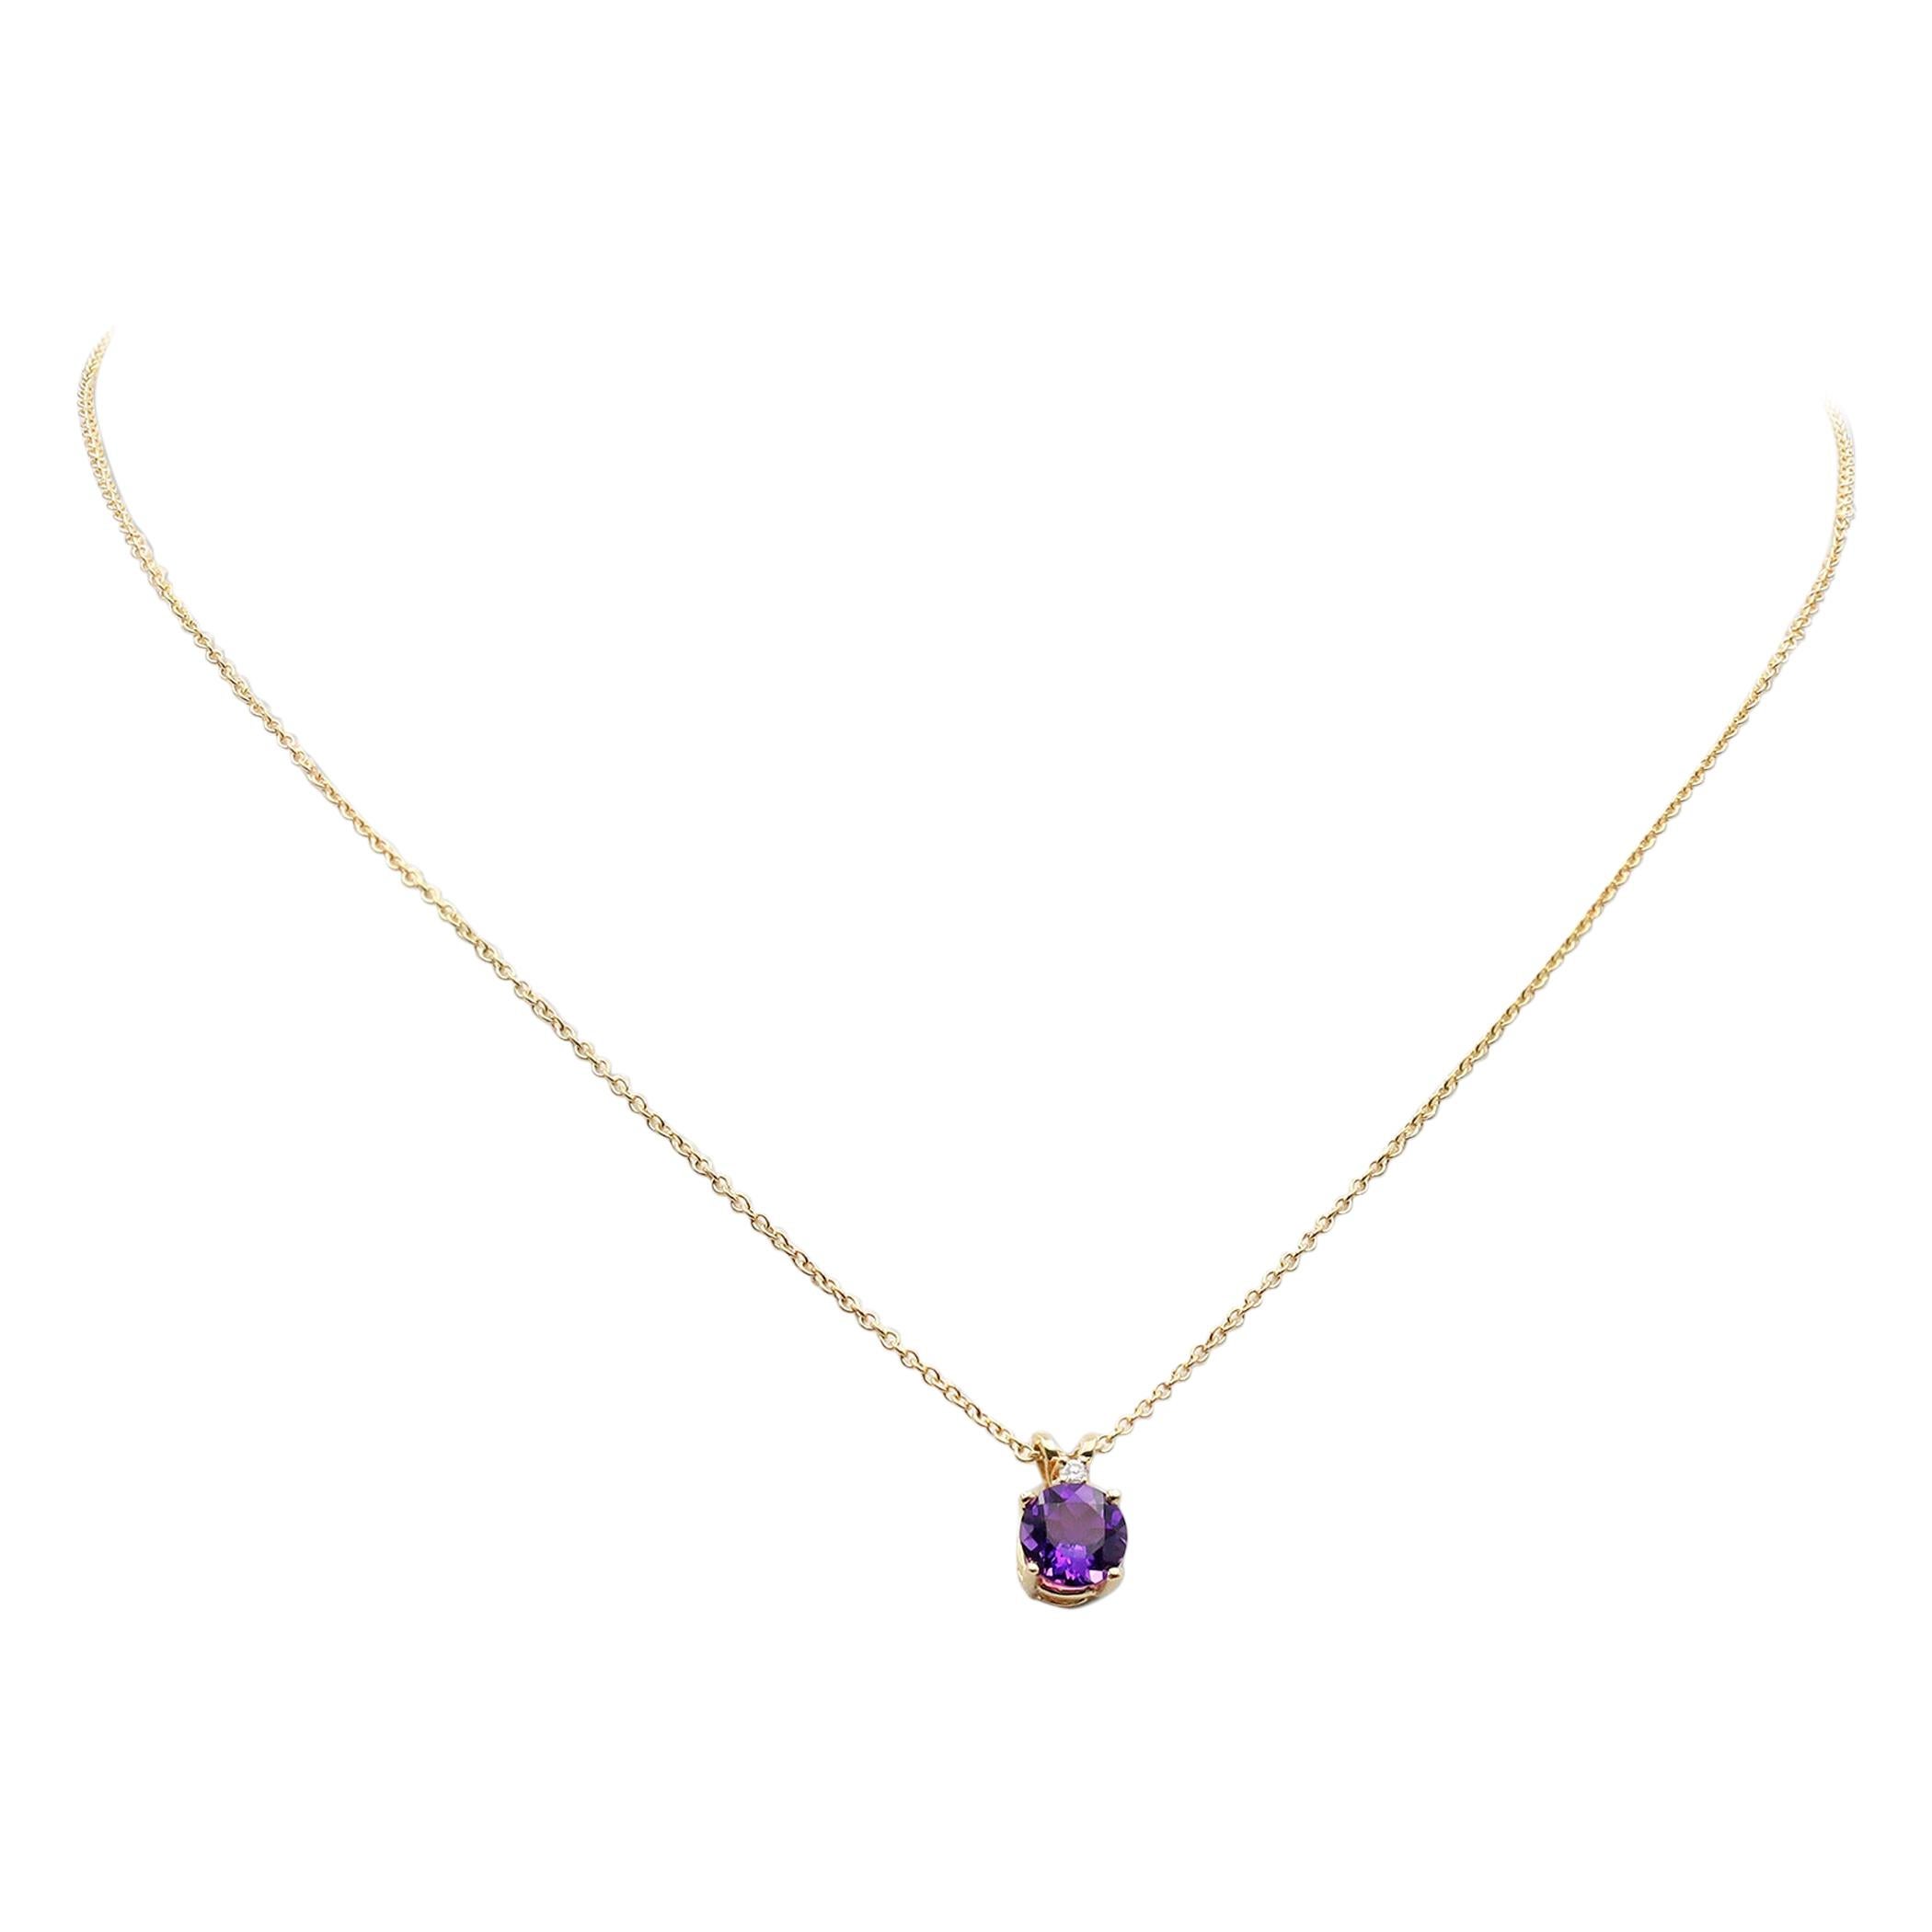 Tiffany & Co. Yellow Gold, Amethyst, and Diamond Pendant Necklace